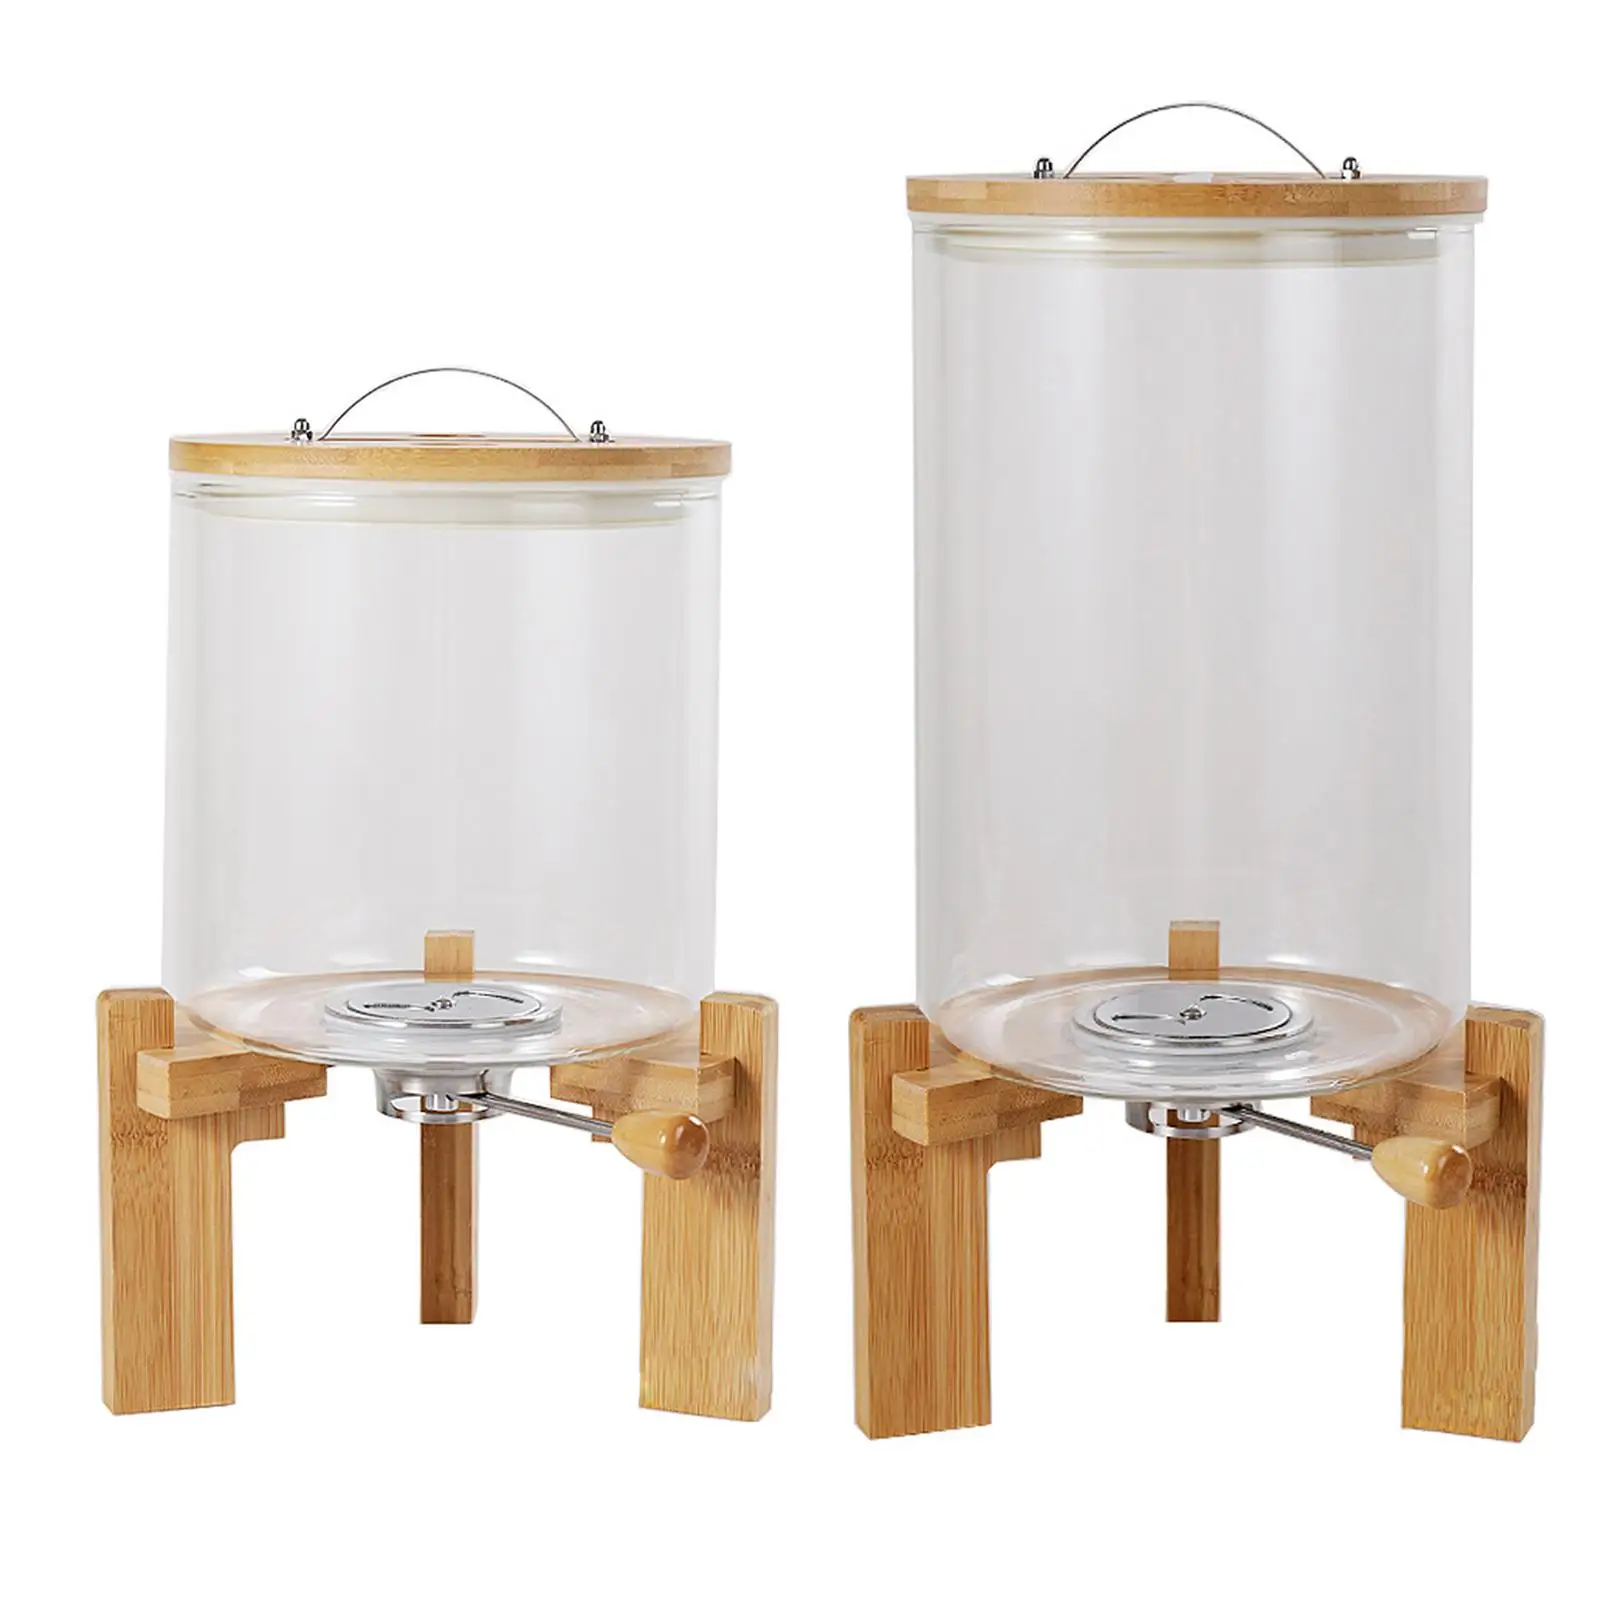 Glss Cerel Continer Seled Bucket with Wood Stnd Portble Insect Proof Rice Dispenser for Grin Pntry Store Sugr Flour